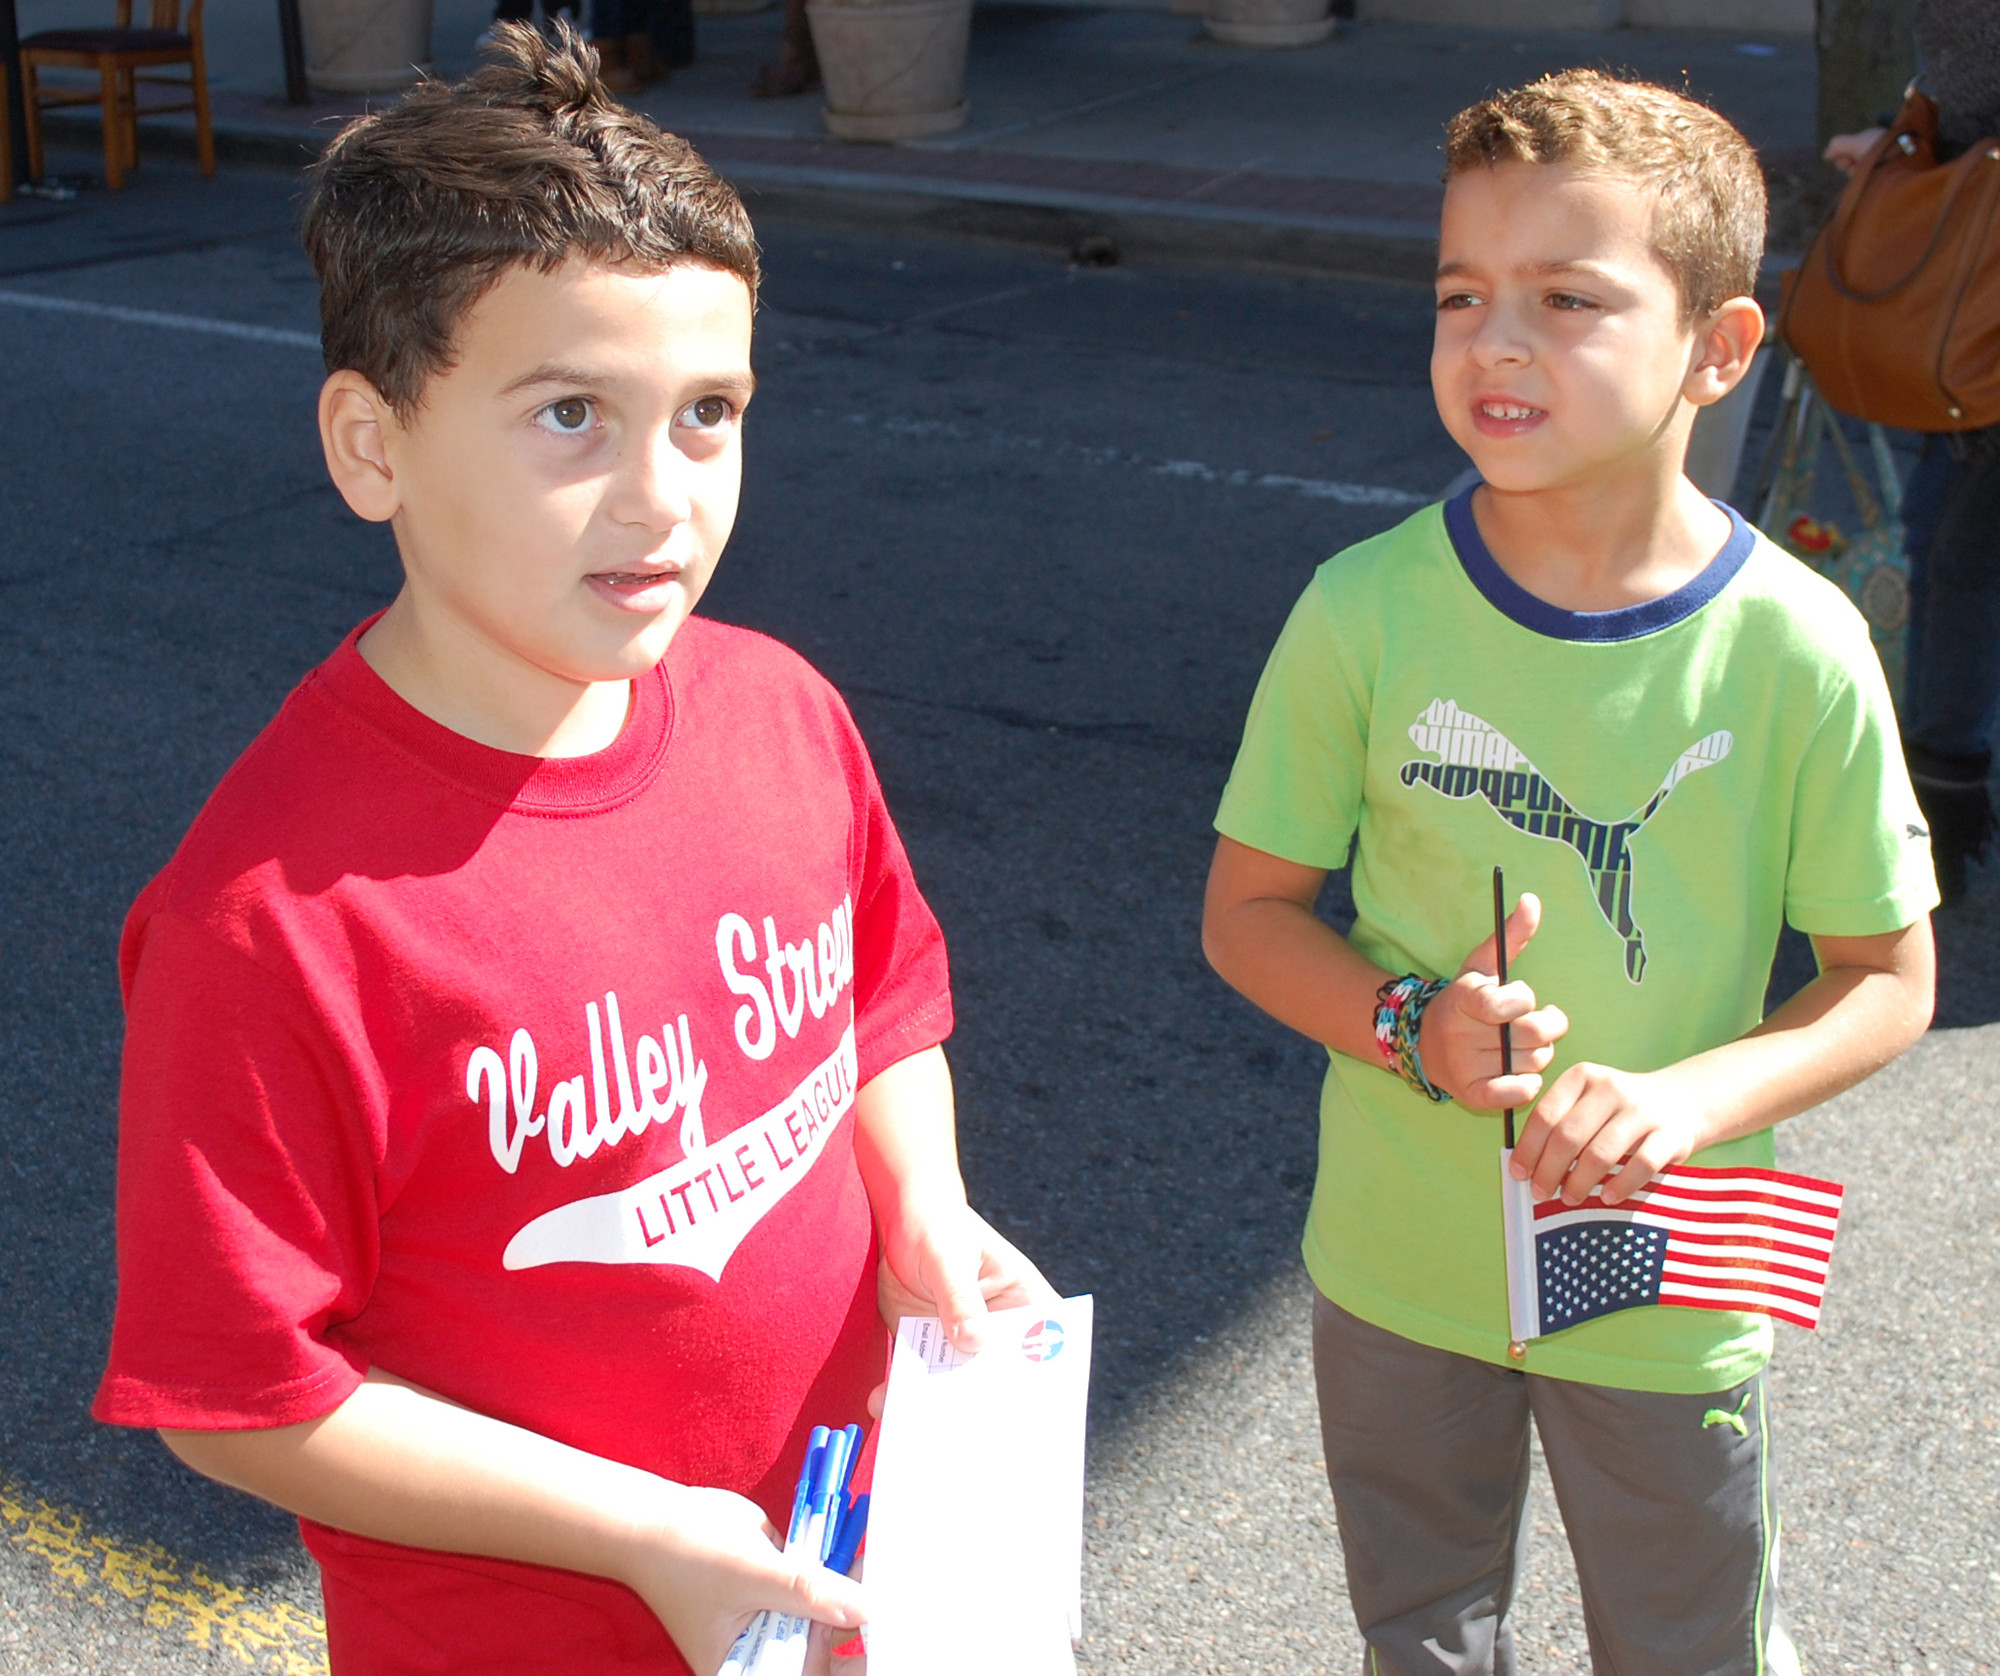 Nicholas Baez, 8, left, and Daniel Banach, 6, were signing fairgoers up for a free raffle for a chance to win a jersey from the Valley Stream Little League.